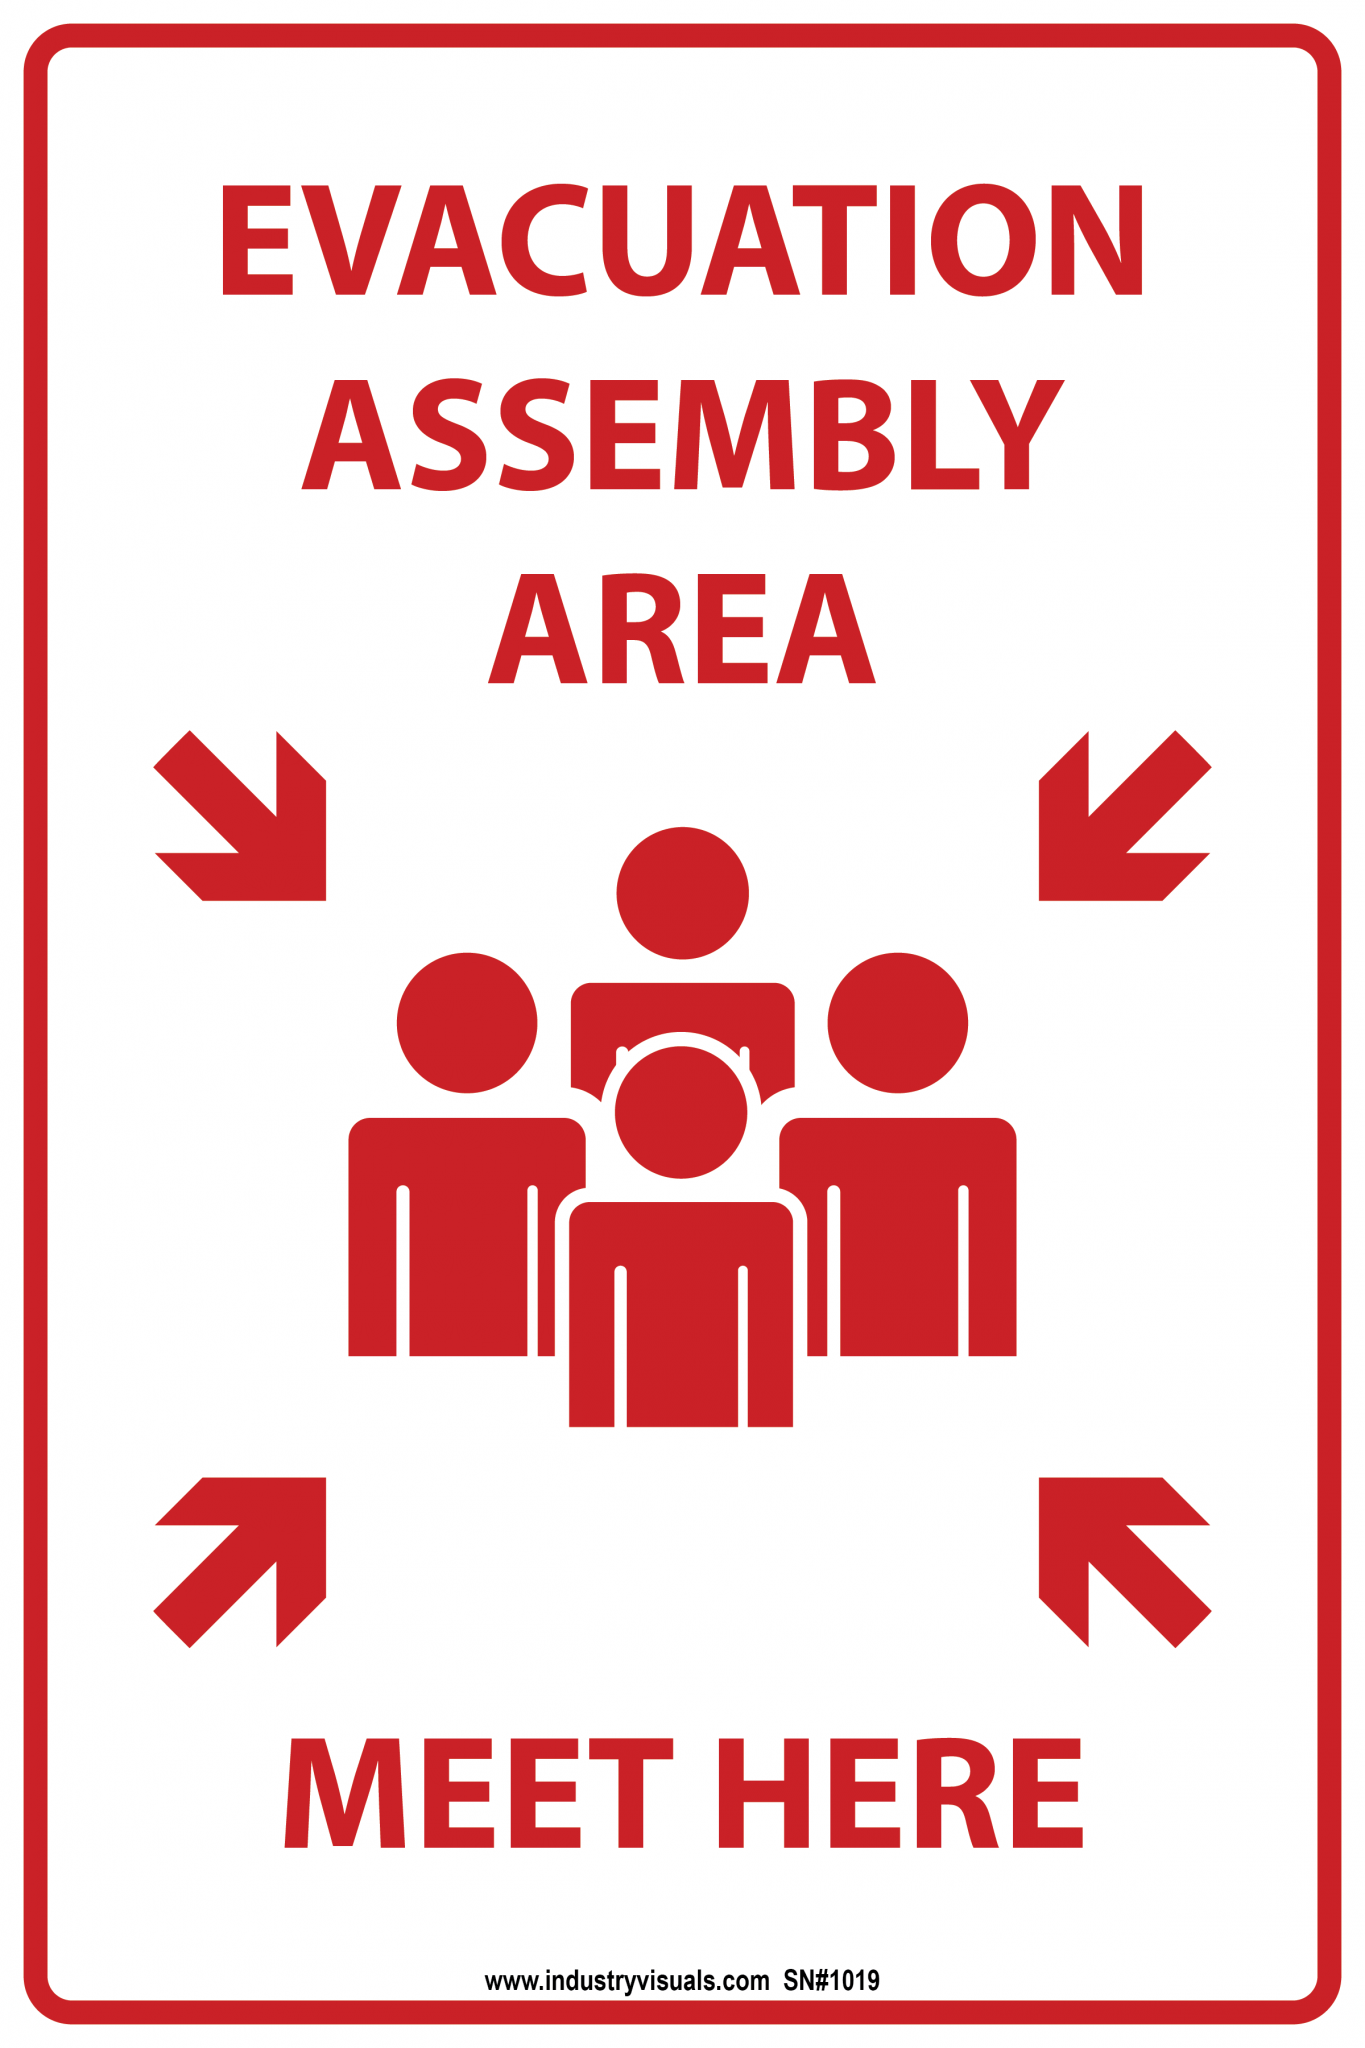 evacuation-assembly-area-industry-visuals